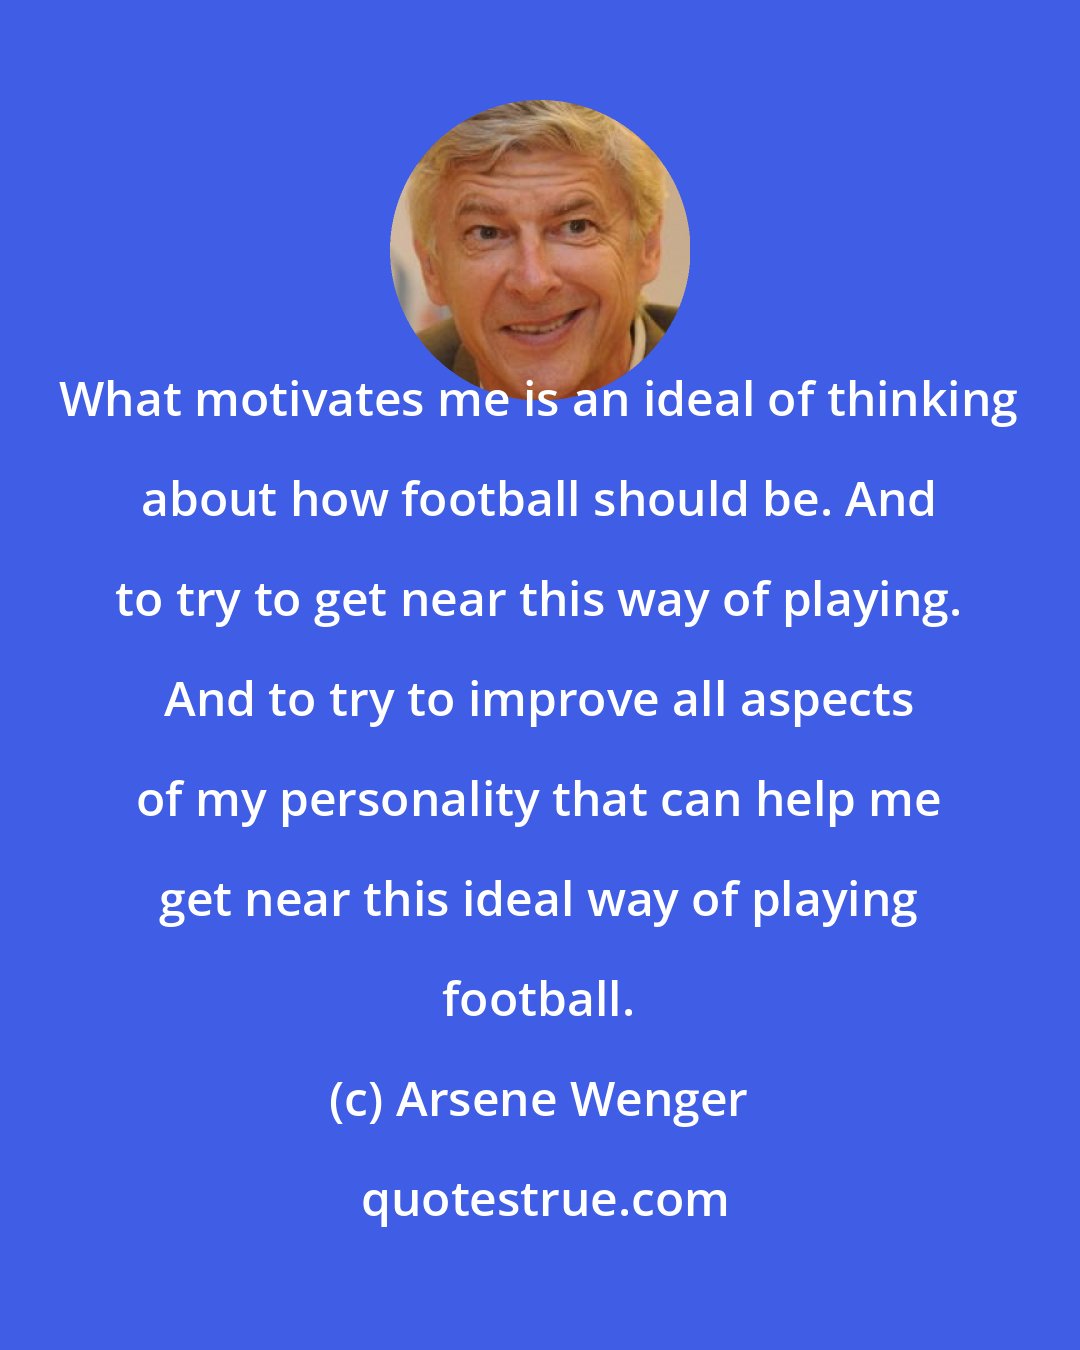 Arsene Wenger: What motivates me is an ideal of thinking about how football should be. And to try to get near this way of playing. And to try to improve all aspects of my personality that can help me get near this ideal way of playing football.